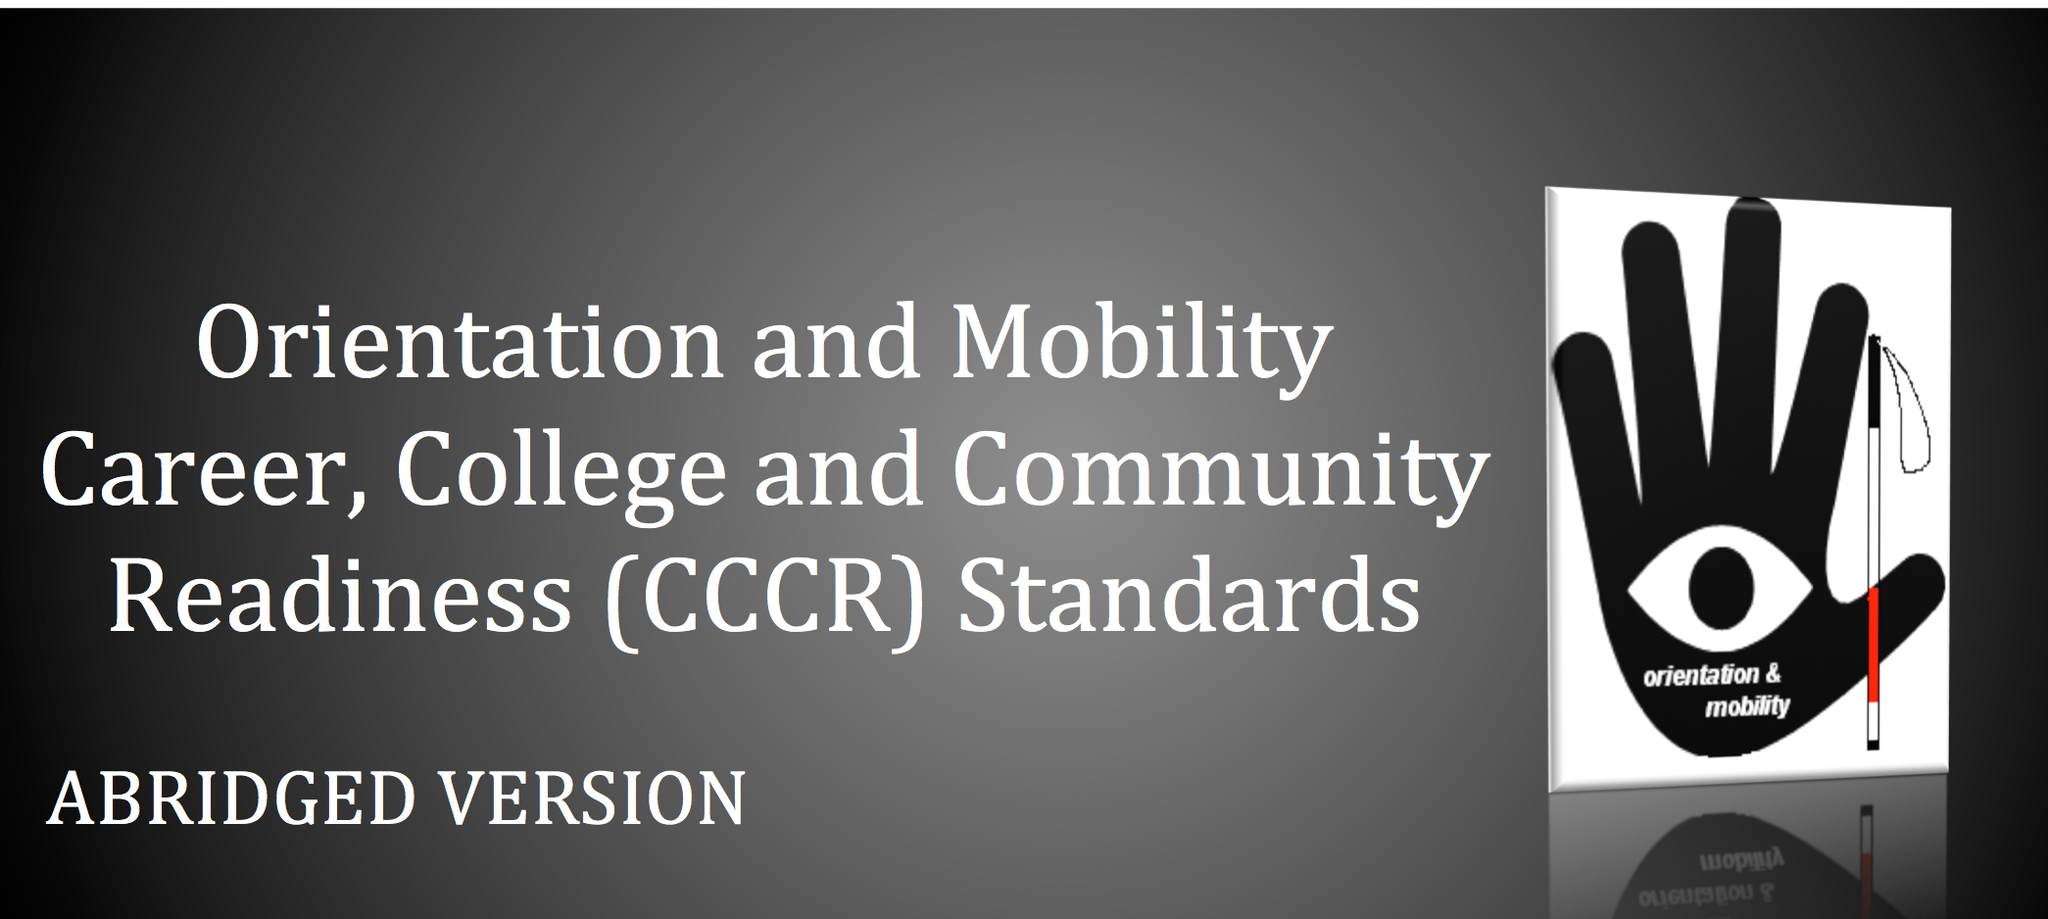 Orientation and Mobility Career, College and Community Readiness (CCCR) Standards cover slide